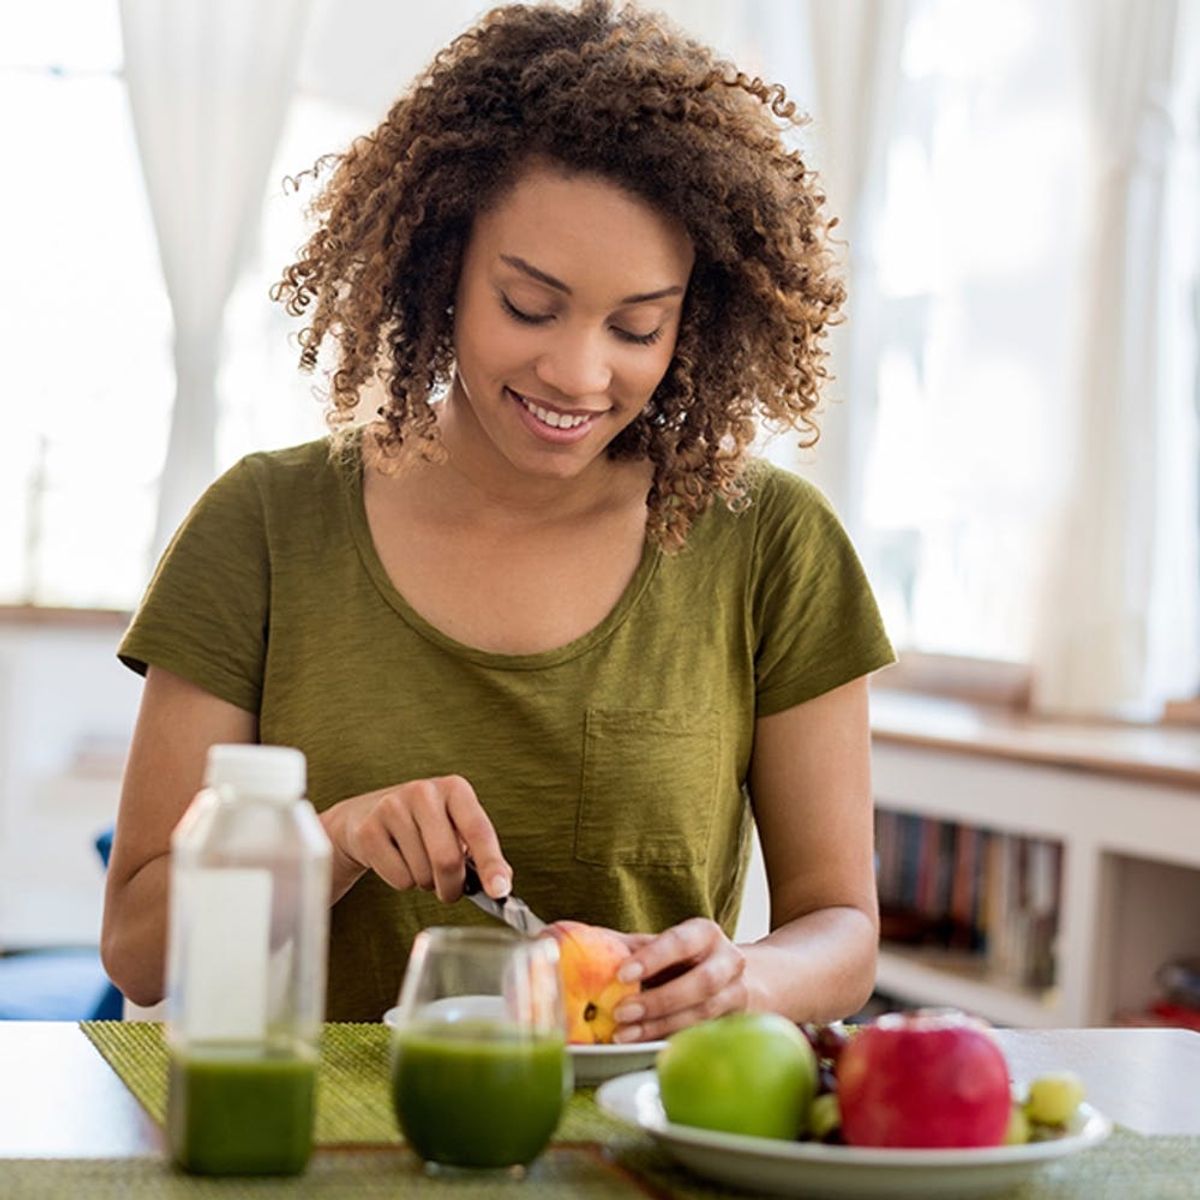 Easy Ways to Make Your Diet More Heart-Healthy